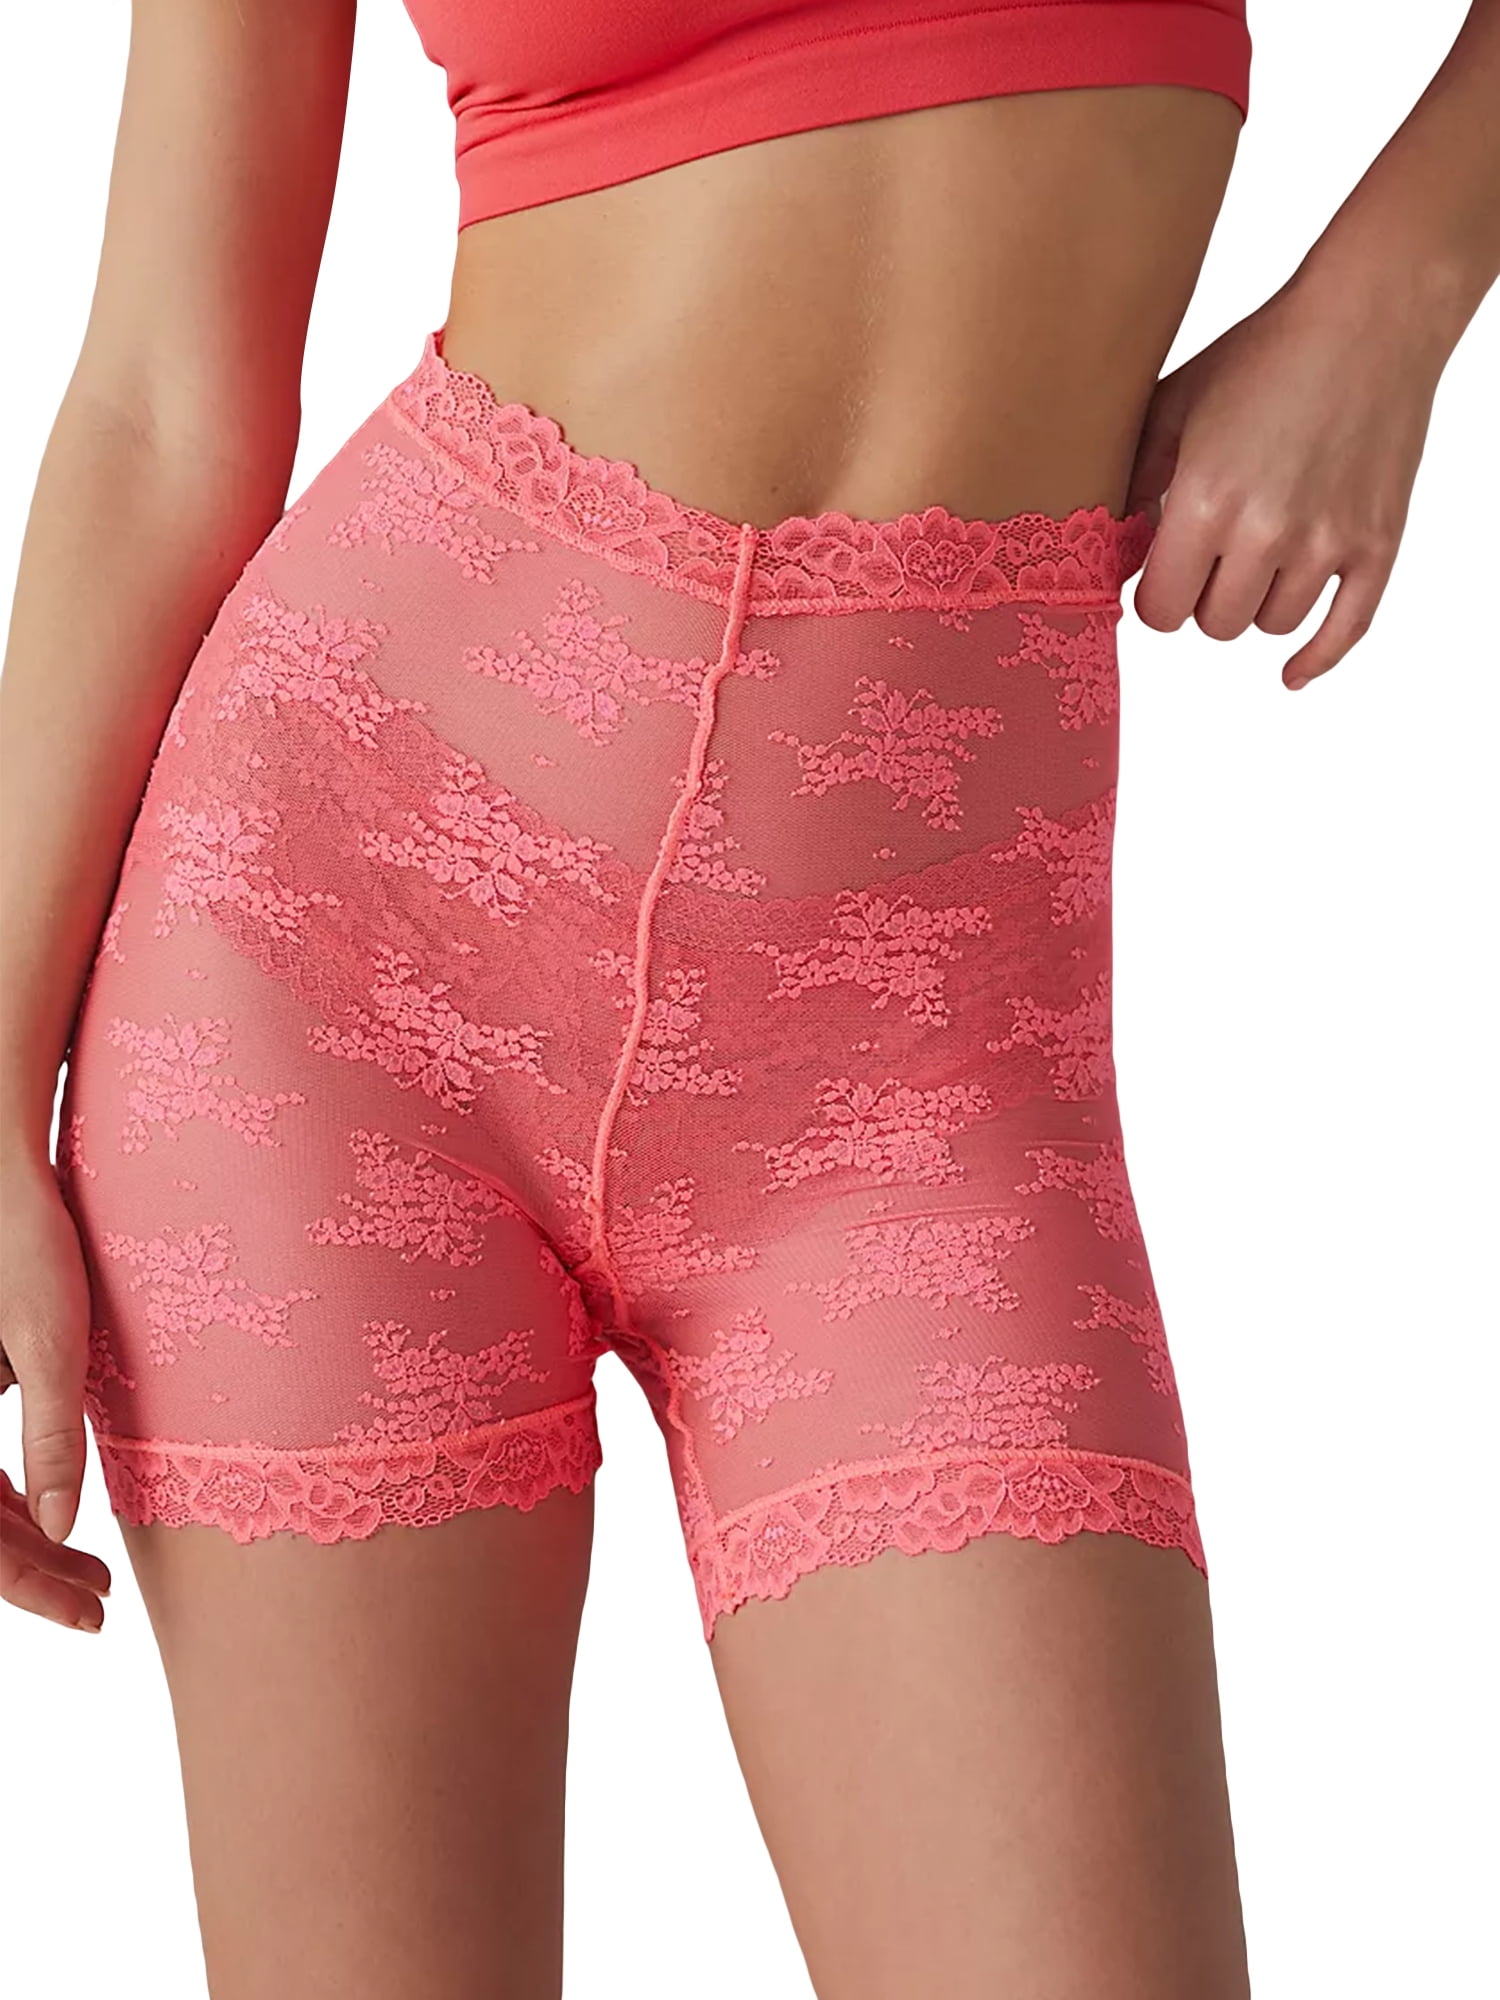 WOMEN'S UNDER SHORTS WITH LACE DETAIL, Fashion Bug